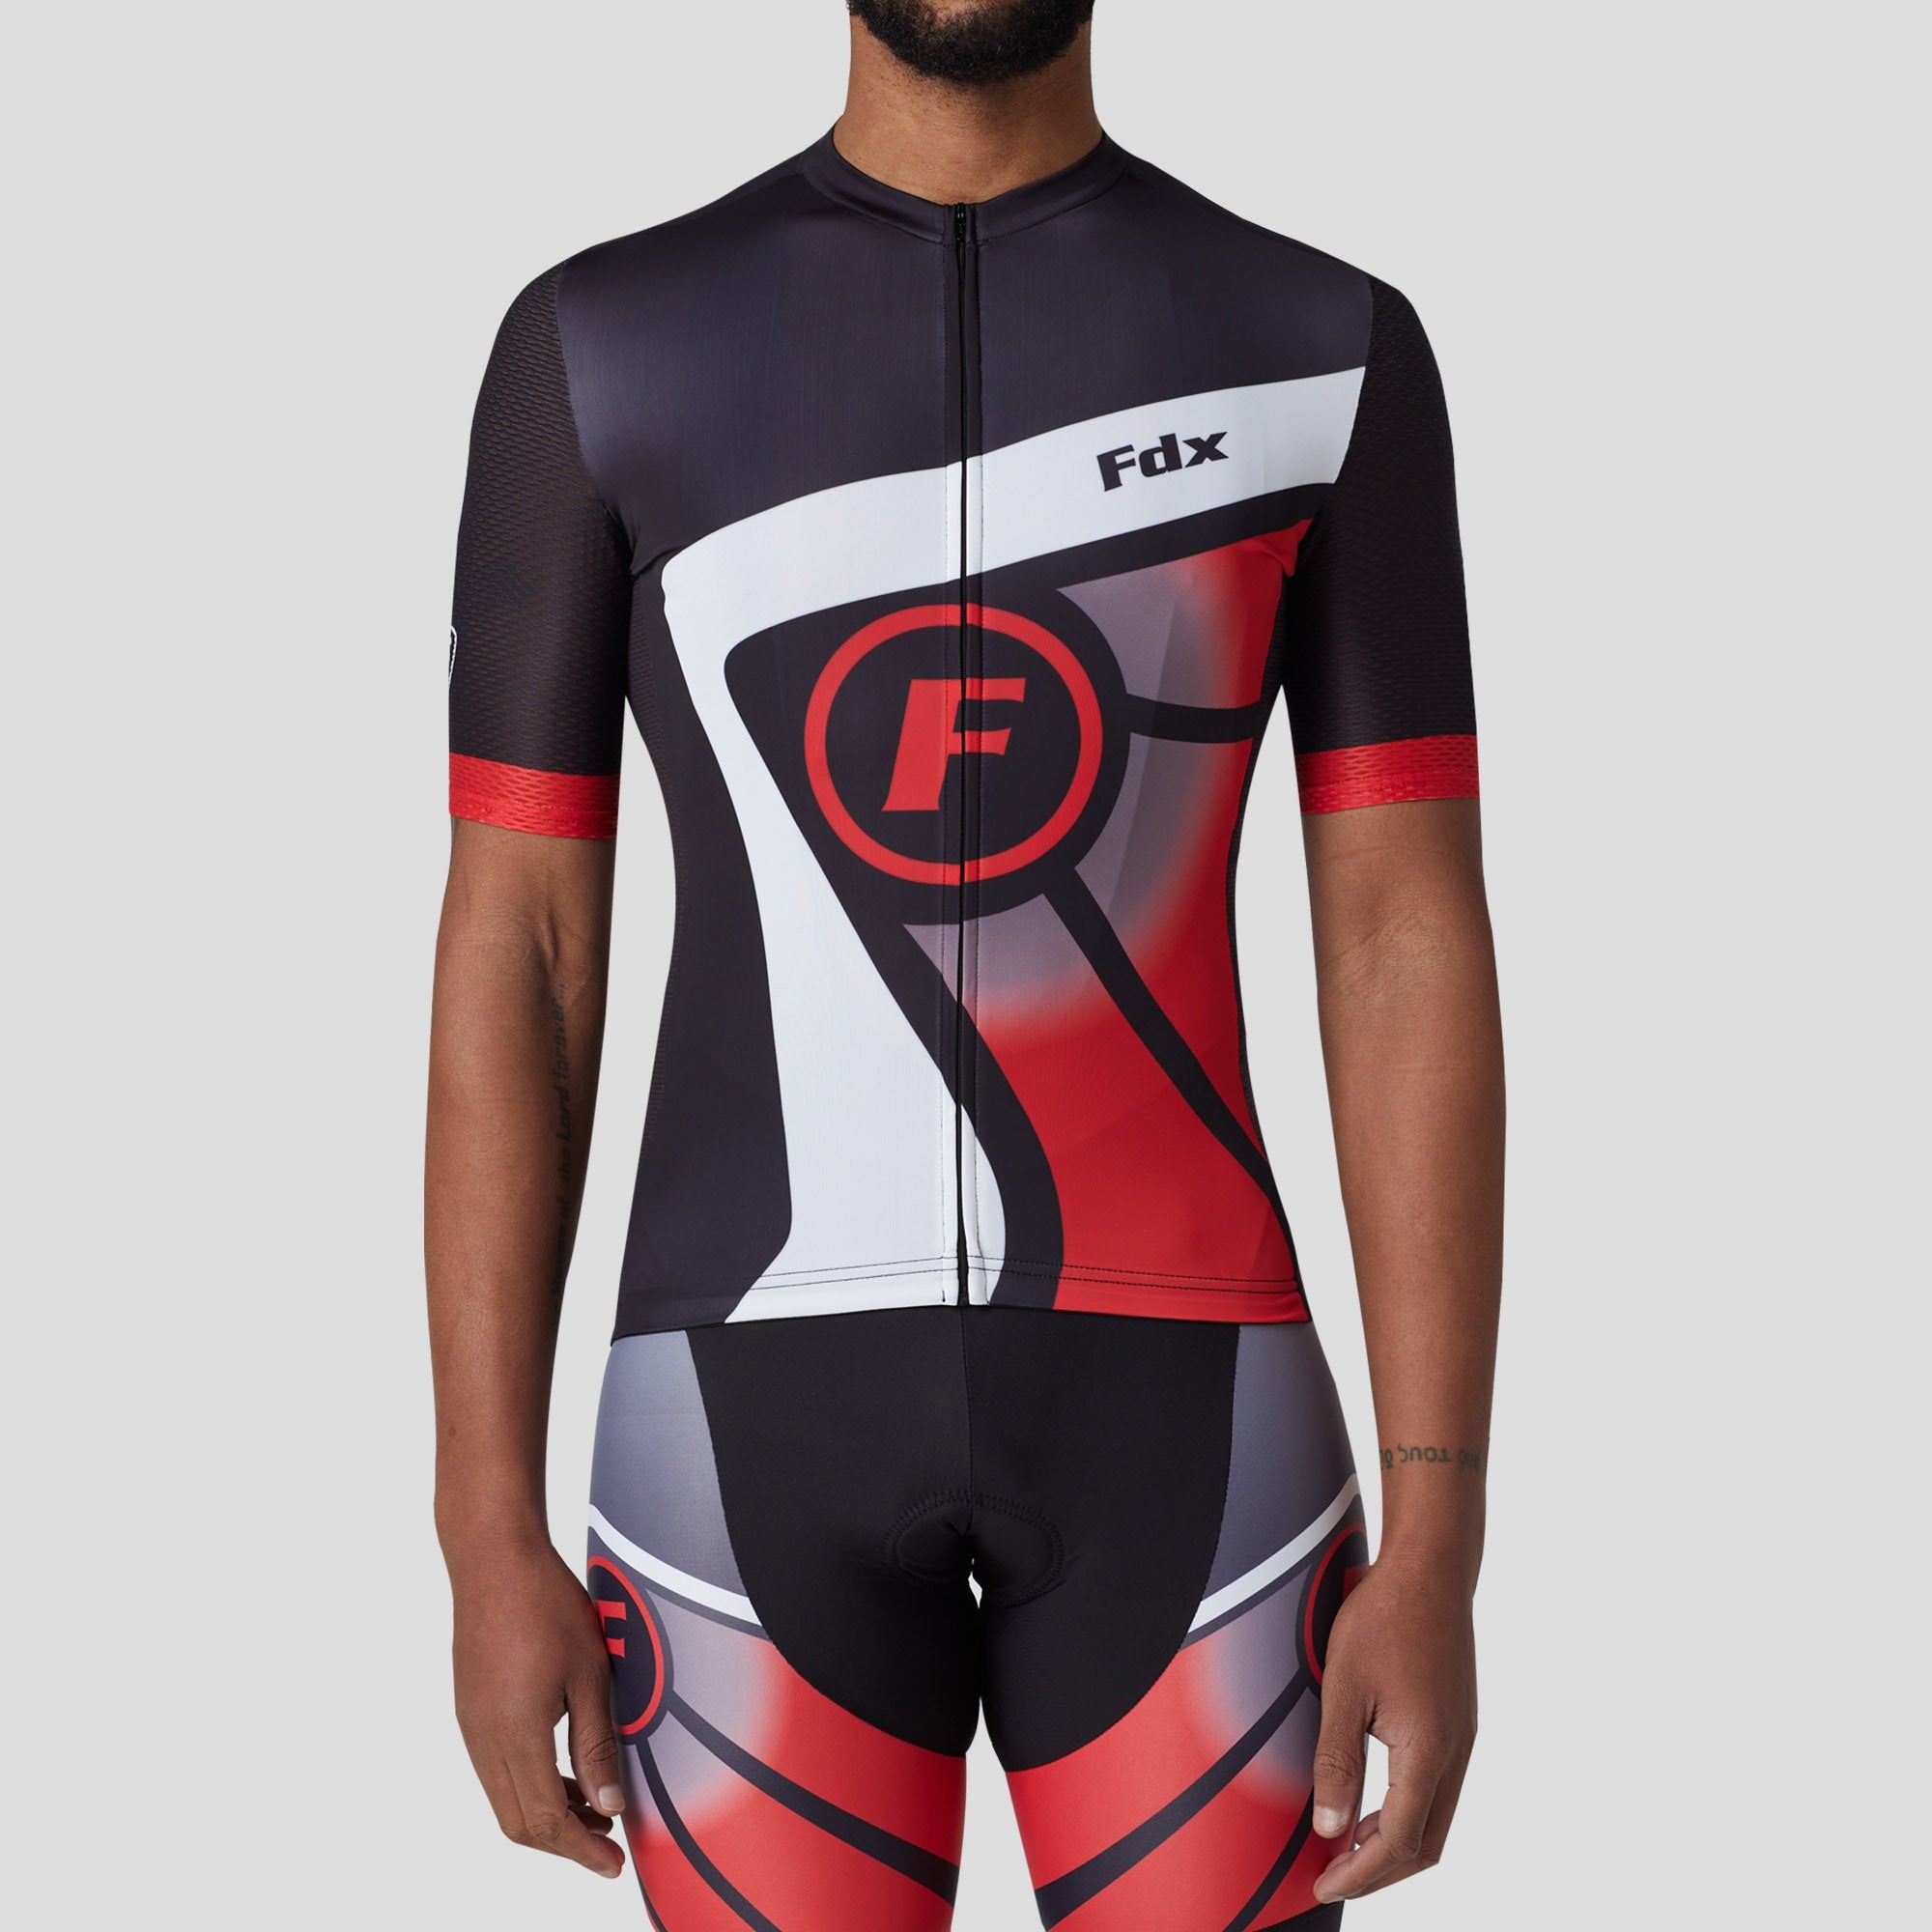 Fdx men’s black & red best short sleeves cycling jersey breathable lightweight hi-viz Reflective details summer biking top, full zip skin friendly half sleeves mesh cycling shirt for indoor & outdoor riding with two back & 1 zip pockets